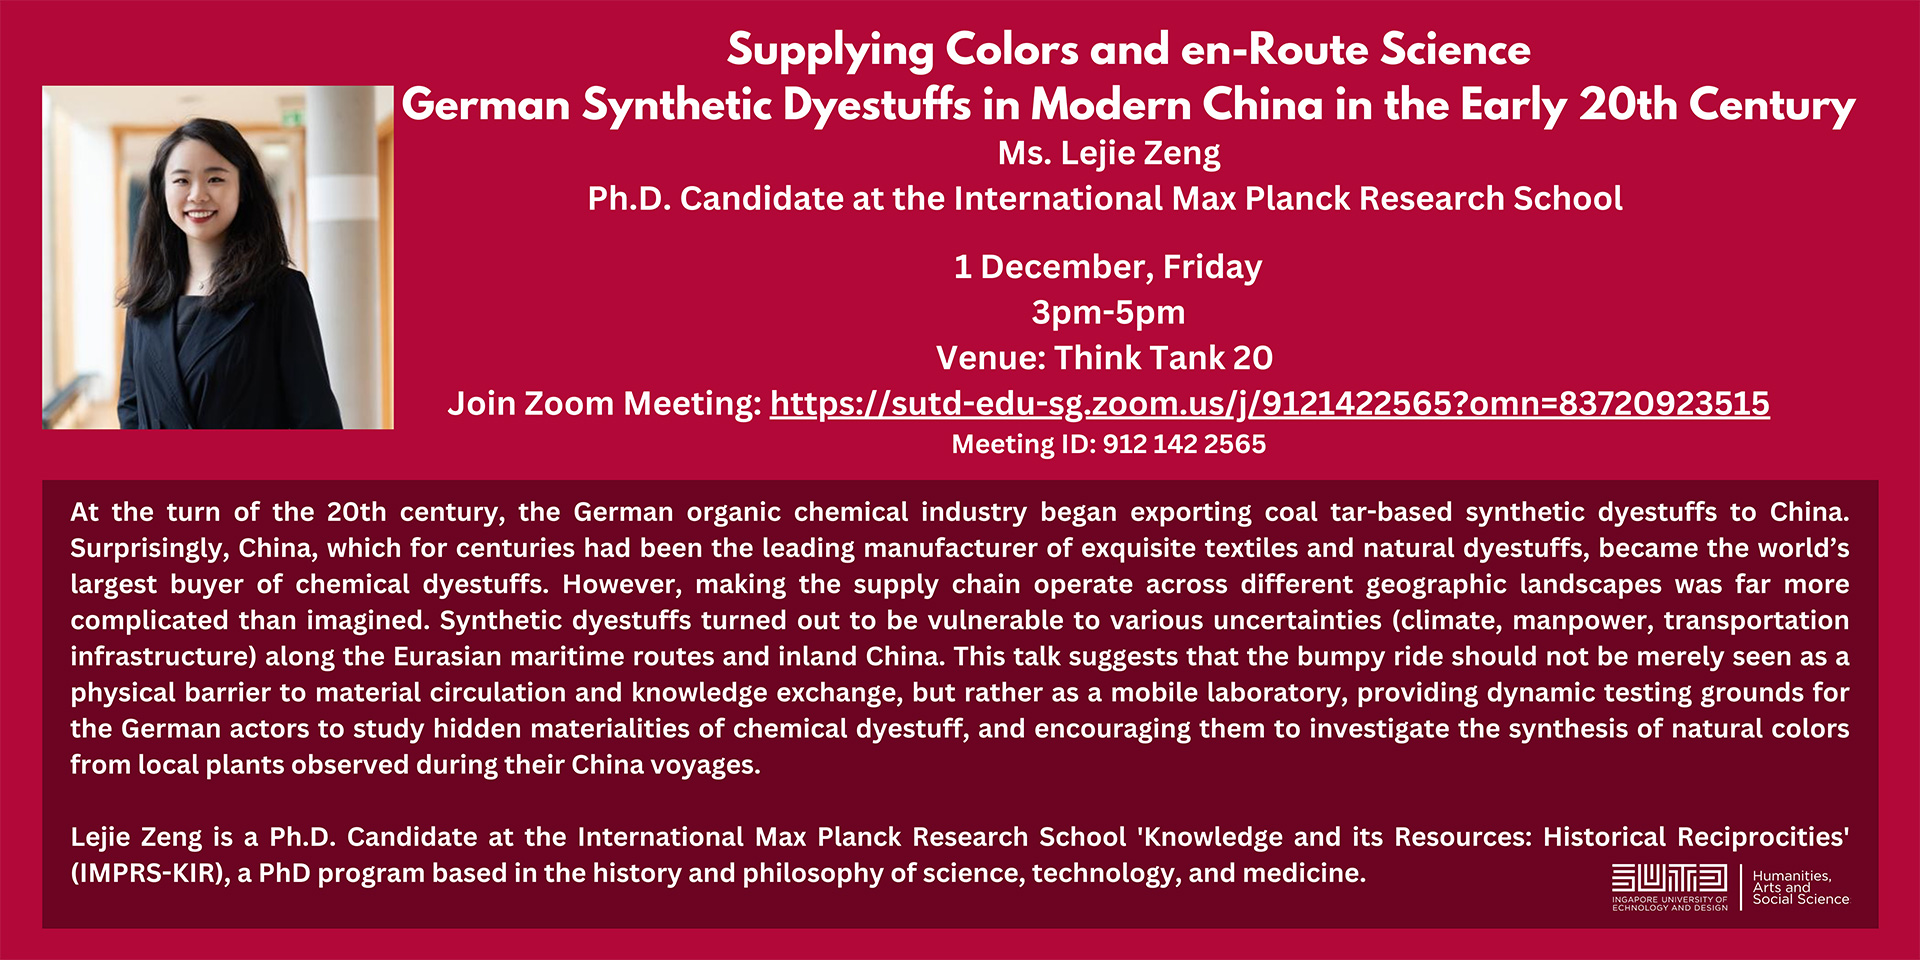 HASS Colloquium Series: Supplying Colors and en-Route Science: German Synthetic Dyestuffs in Modern China in the Early 20th Century by Ms. Lejie Zeng